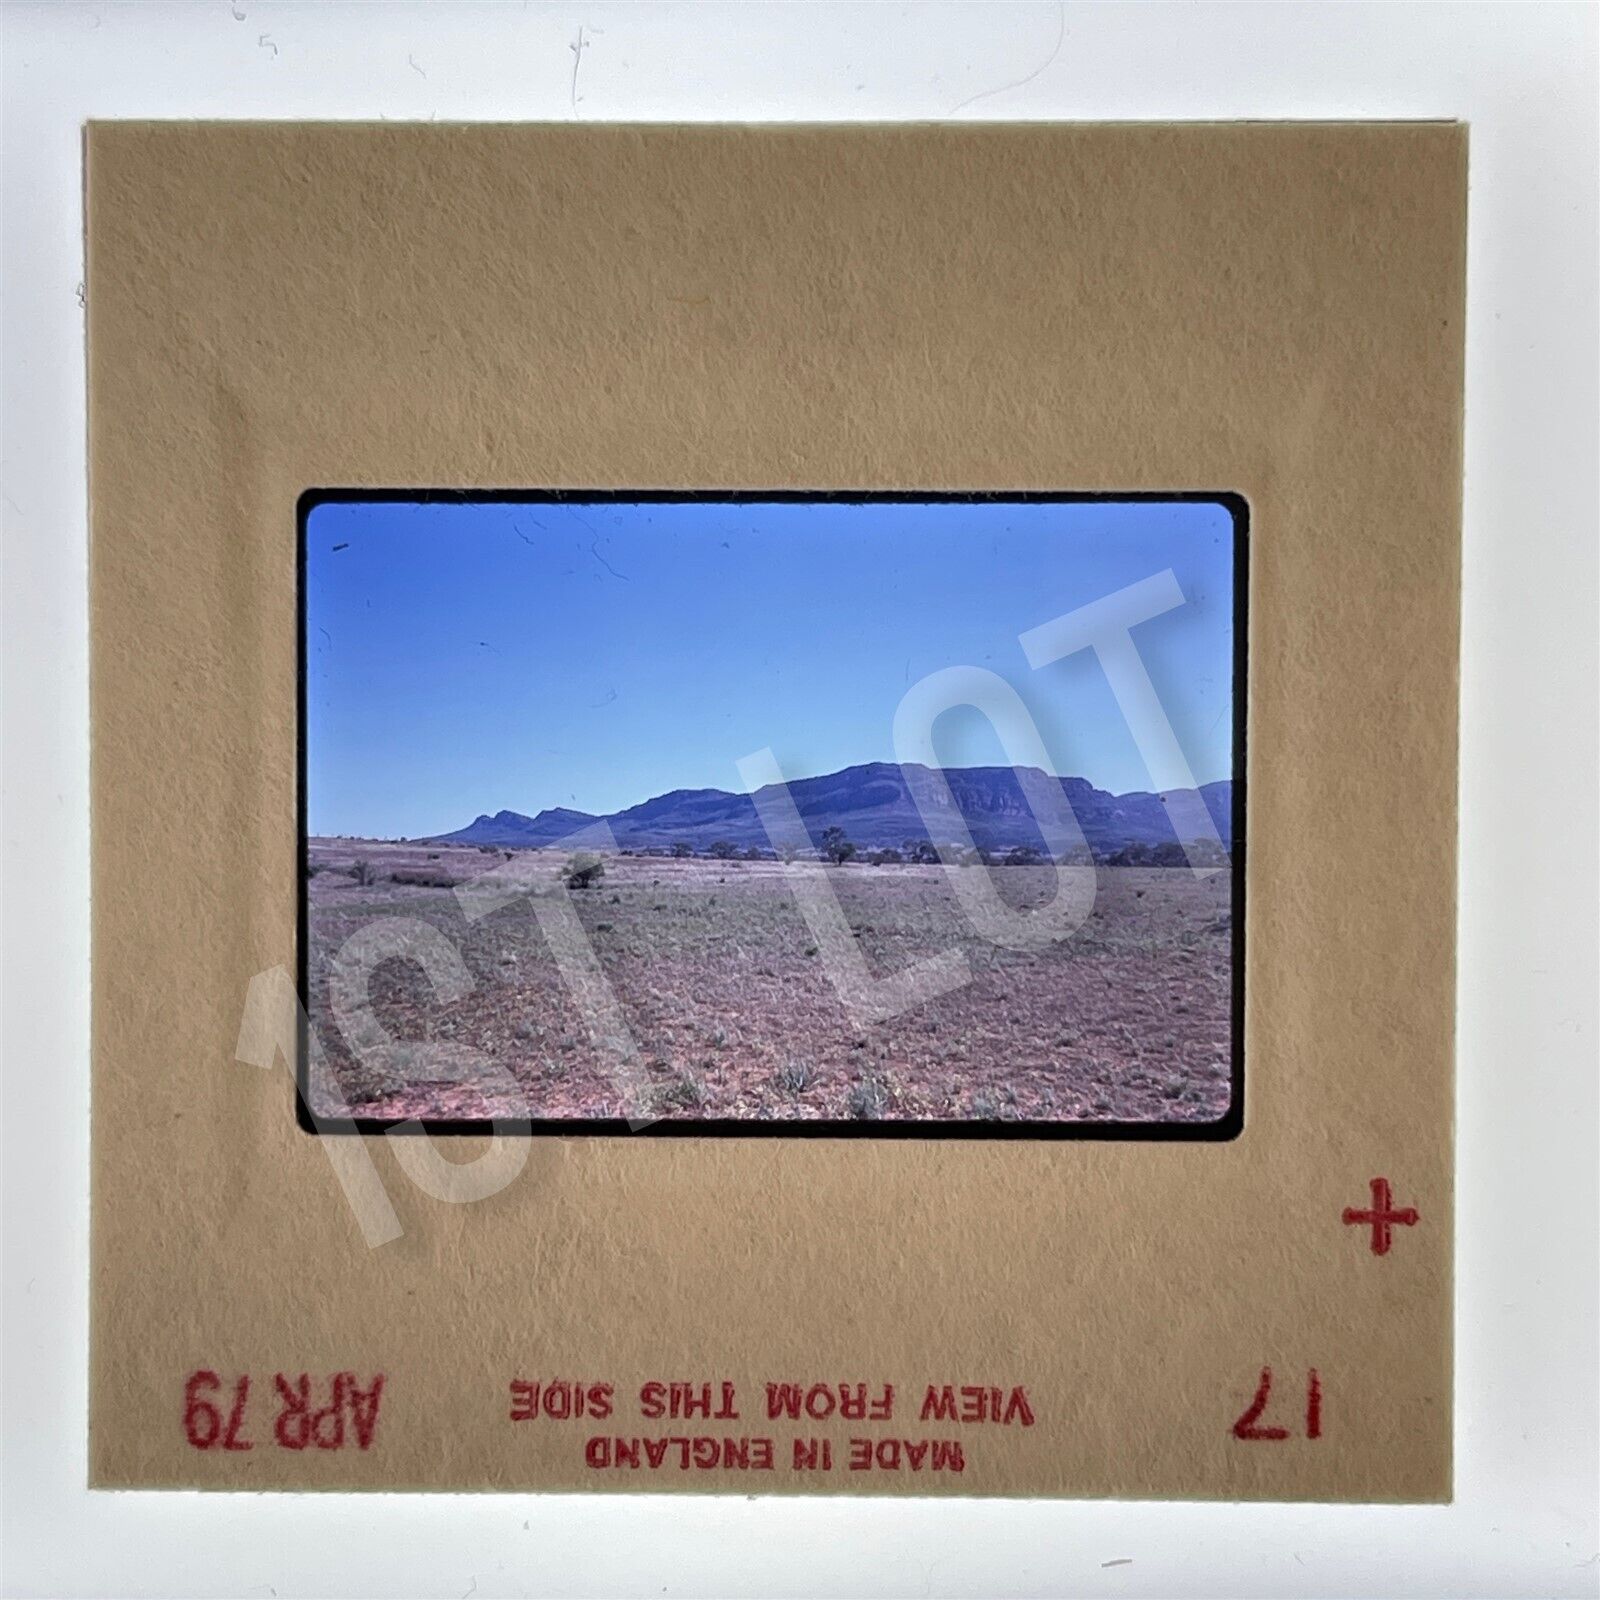 35mm Slide - Expansive Desert with Mountain Range - Classic American West